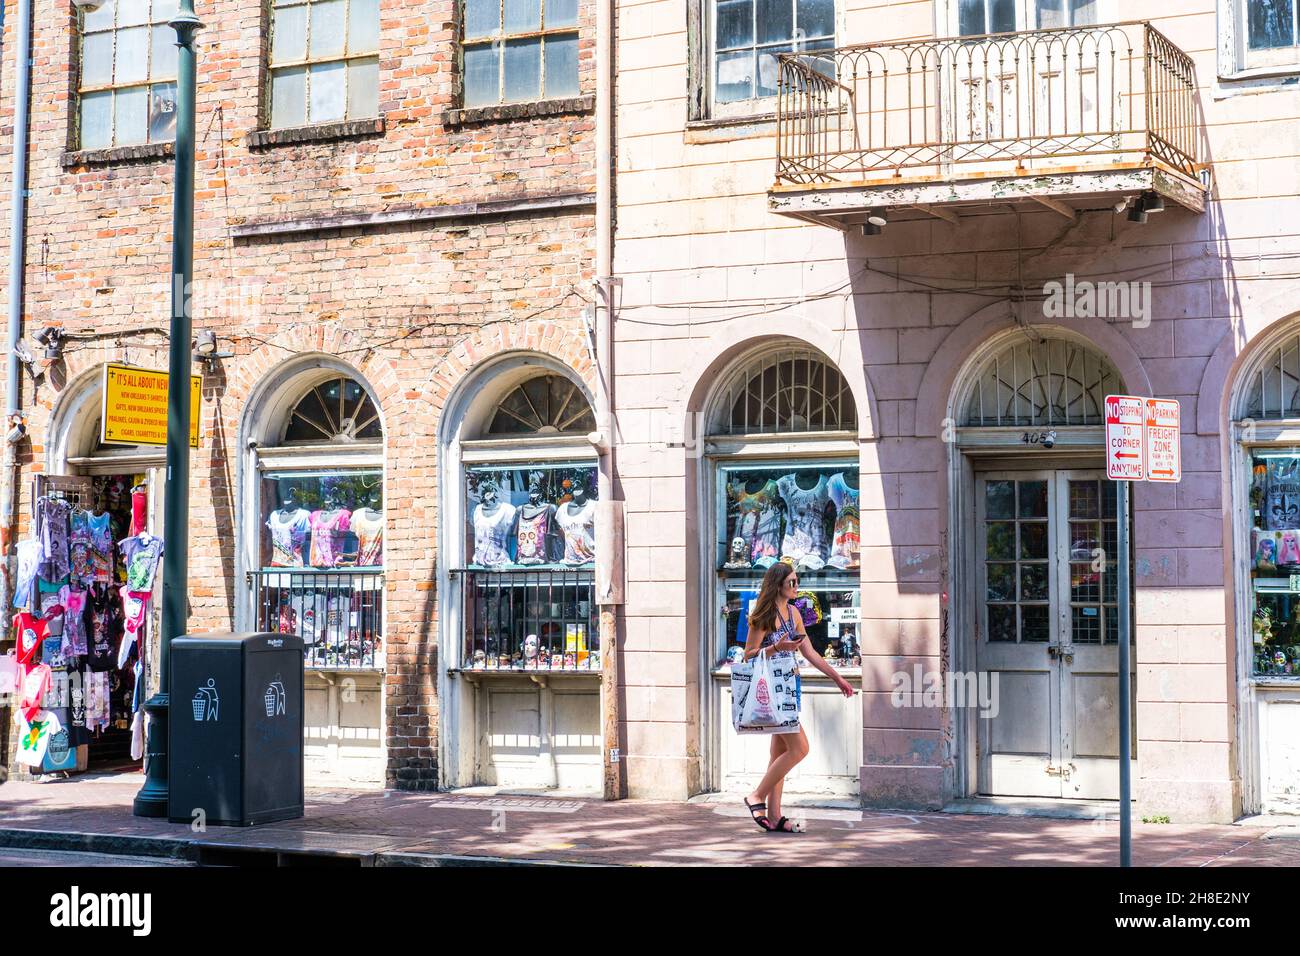 NEW ORLEANS, LA, USA - SEPTEMBER 5, 2020: Tourist Shopping on Decatur Street in the French Quarter Stock Photo